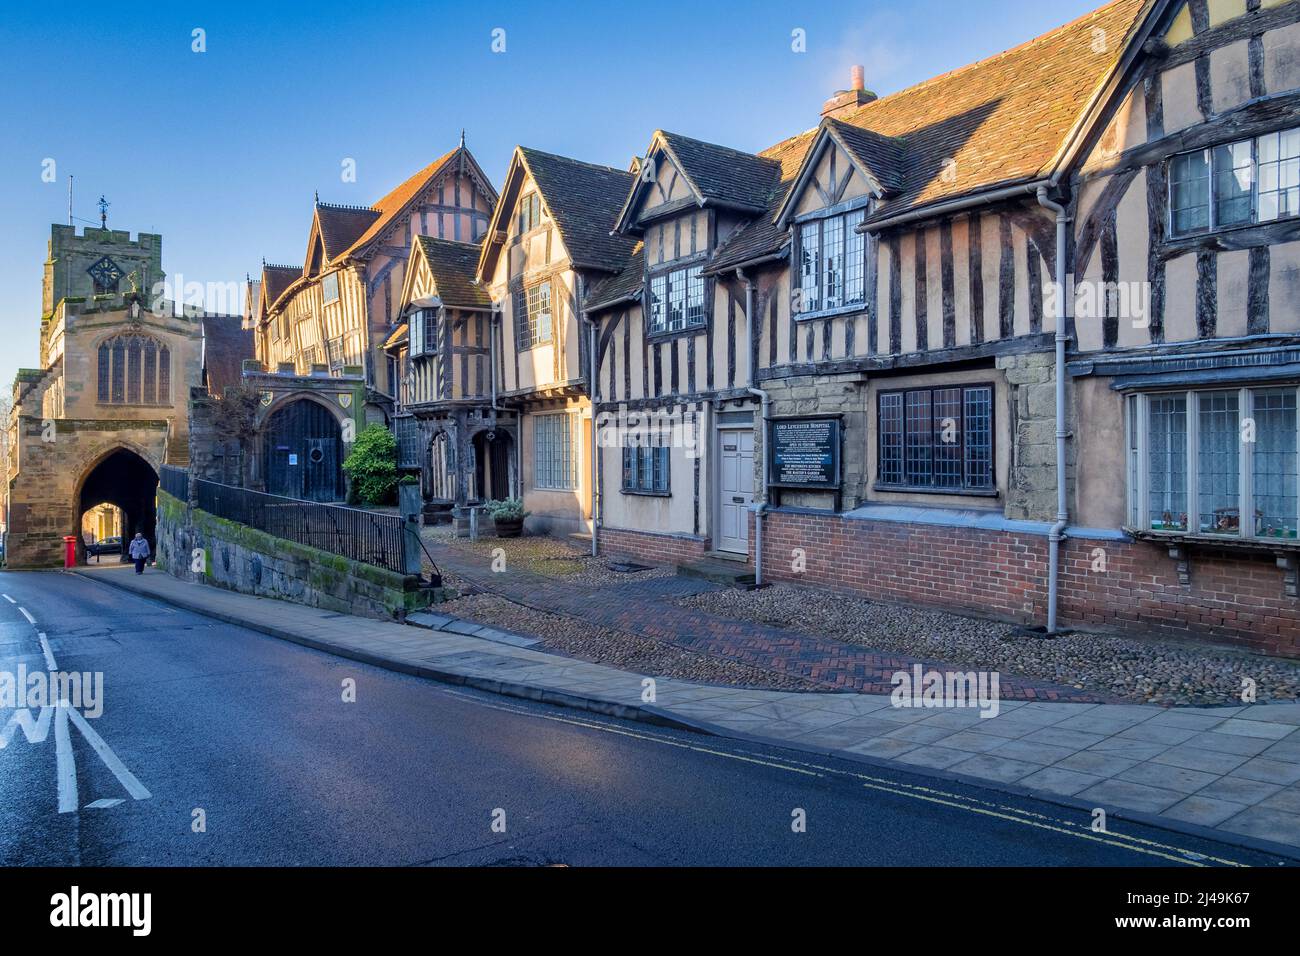 17 January 2022: Warwick, UK - Lord Leycester Hospital, a collection of buildings built between the 13th and 17th centuries, now houses a charity for Stock Photo